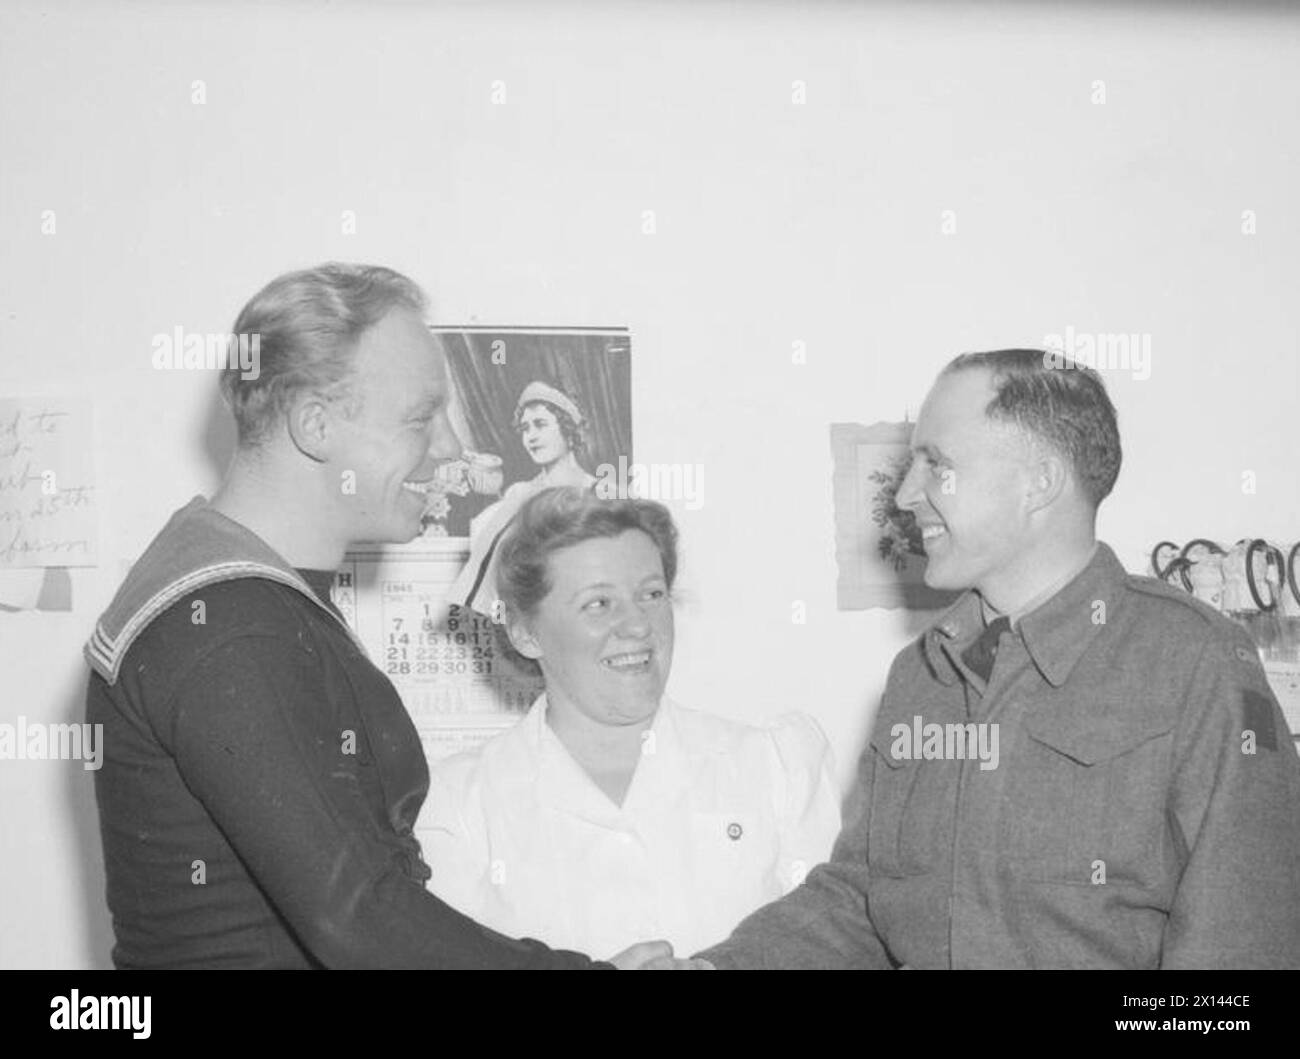 AT THE ROYAL NAVAL TELEGRAPHIST AIR GUNNERS SCHOOL IN CANADA. FEBRUARY 1945, YARMOUTH, NOVA SCOTIA. - Private William Cook, of the Canadian Army, thanks NA1 Walker, of Leeds, and NA1 Irvine, of Maidenhead for their blood donations which may have helped to save his life whilst on active service in Belgium Stock Photo